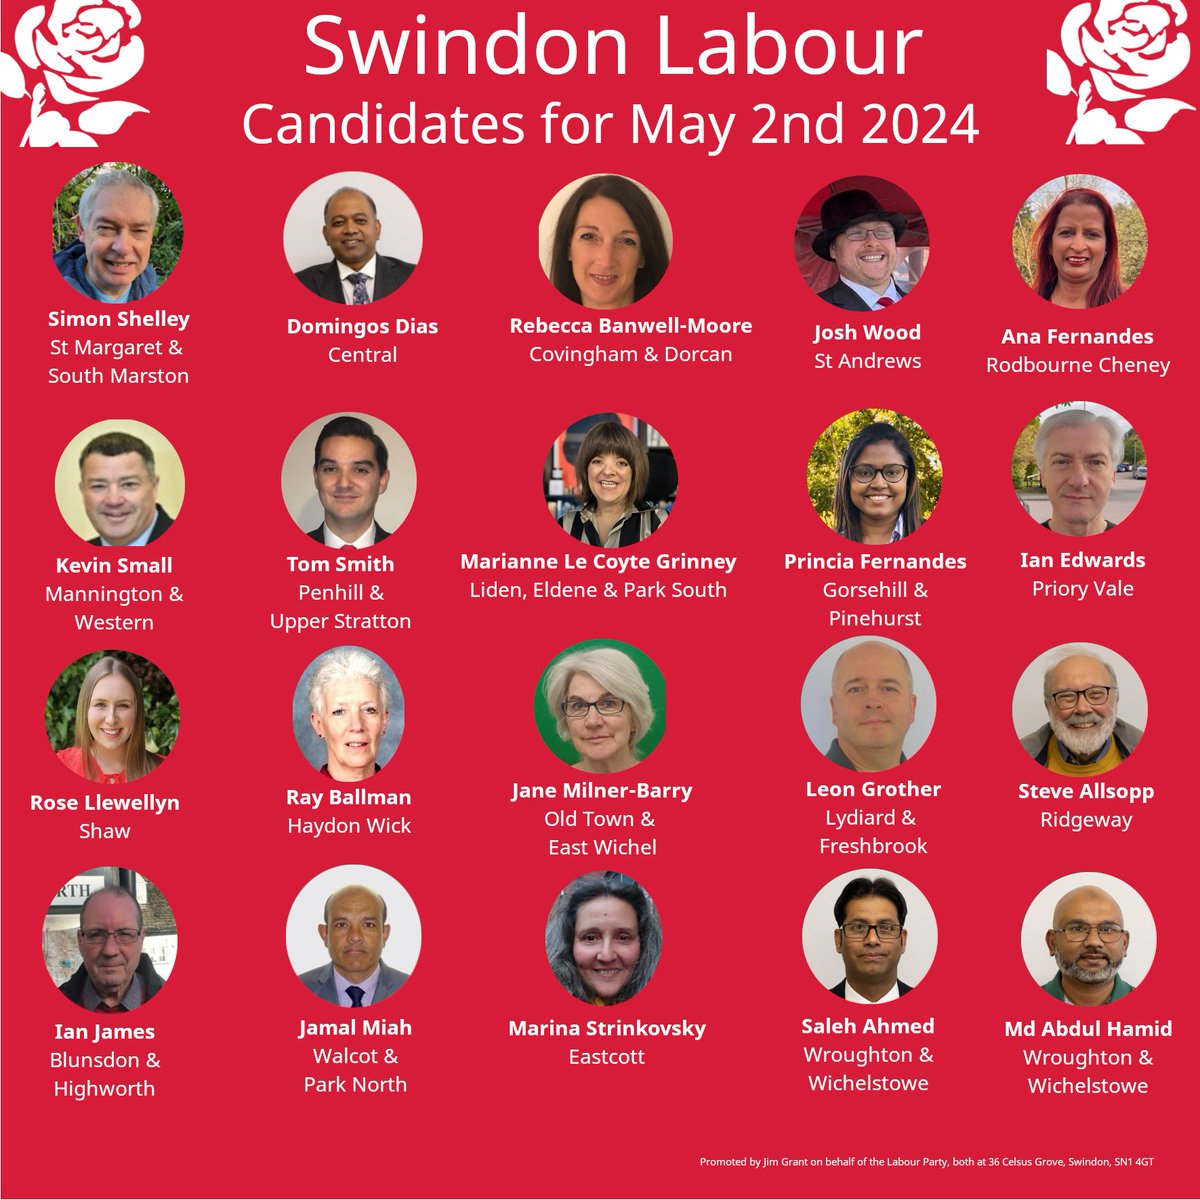 We have a fantastic group of candidates in the upcoming elections - find out more about them here! swindonlabour.org/candidates/